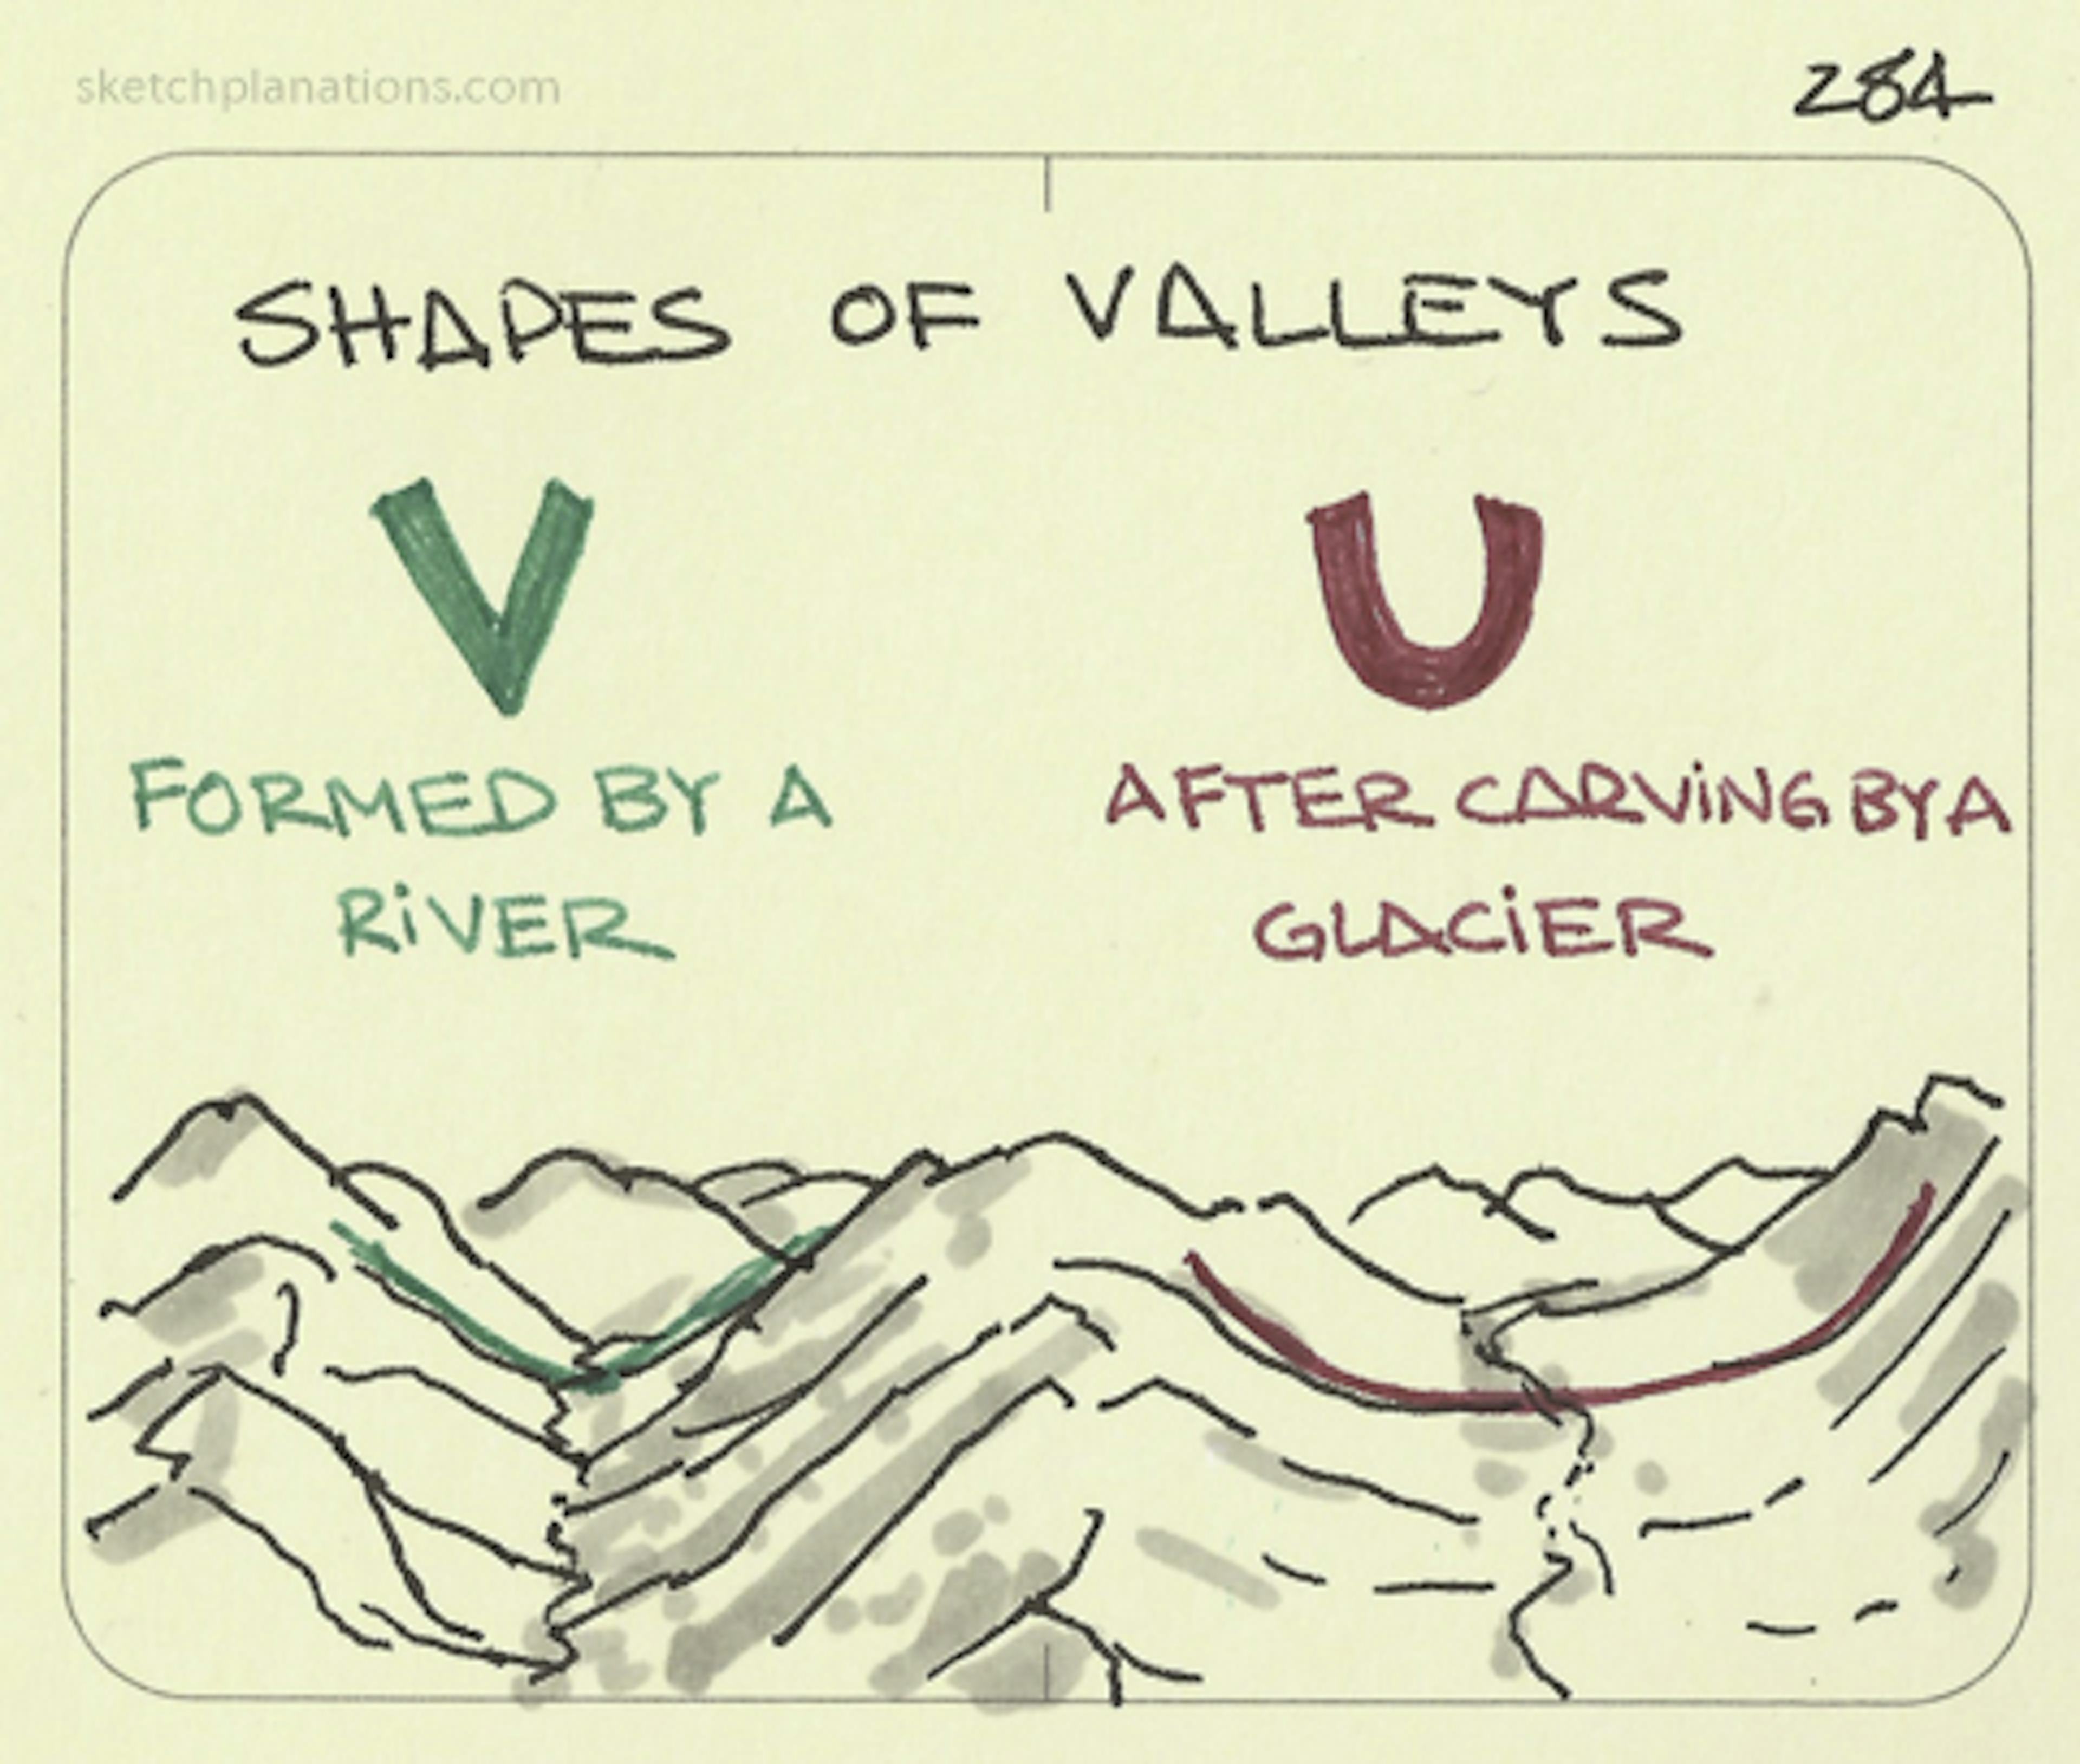 Shapes of Valleys - Sketchplanations